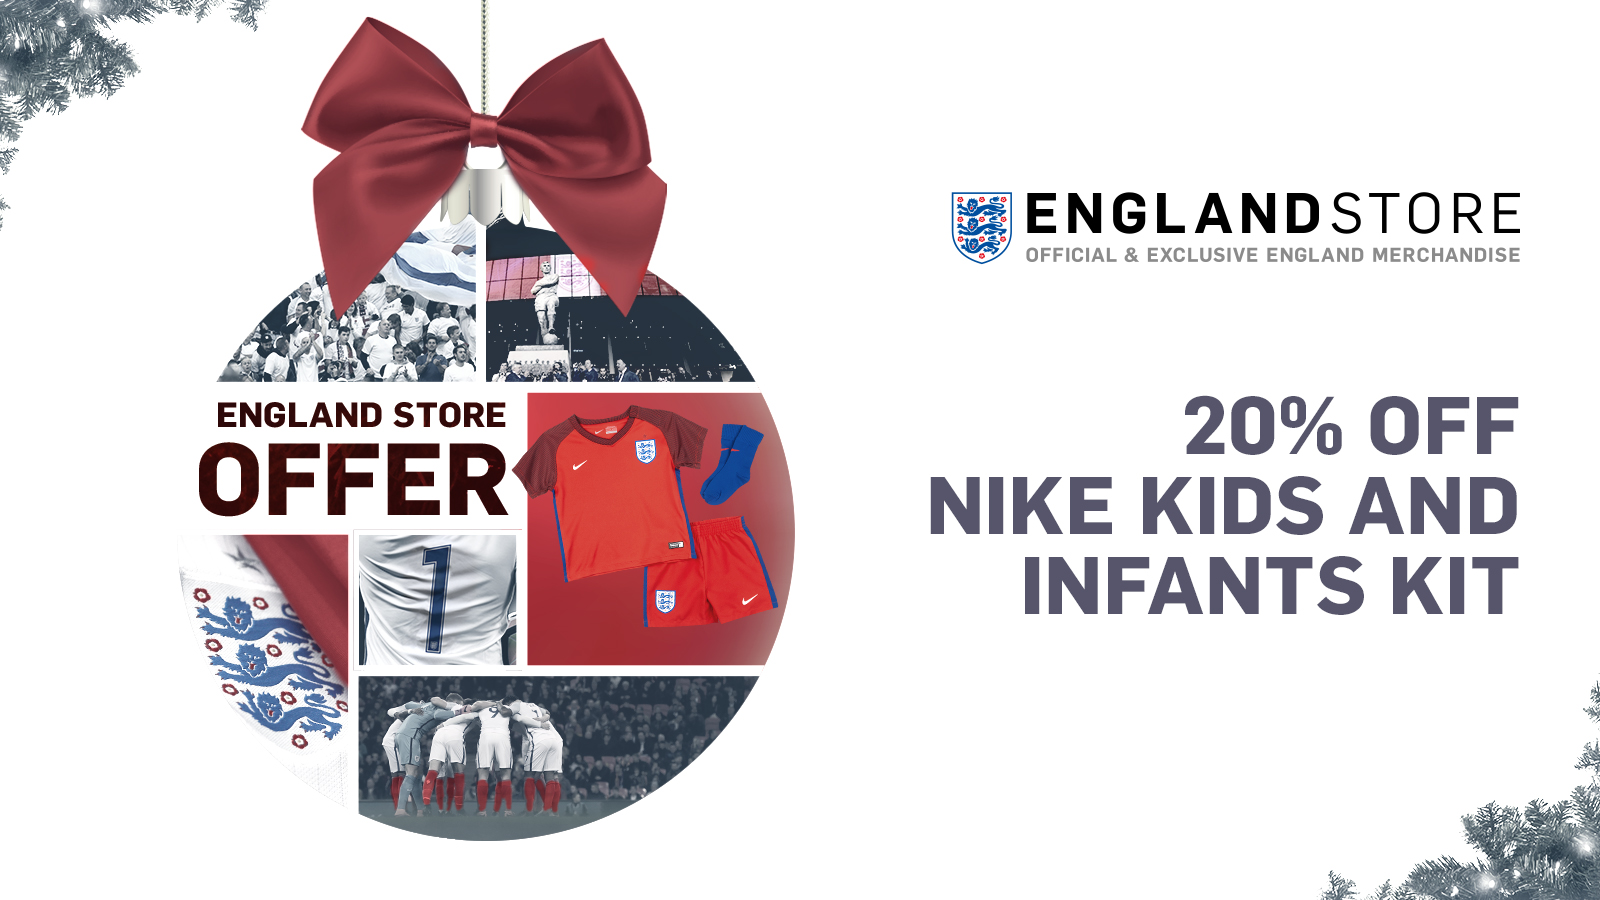 Day 1 Of Our Christmas Advent Calendar England Store Offer News England Supporters Club